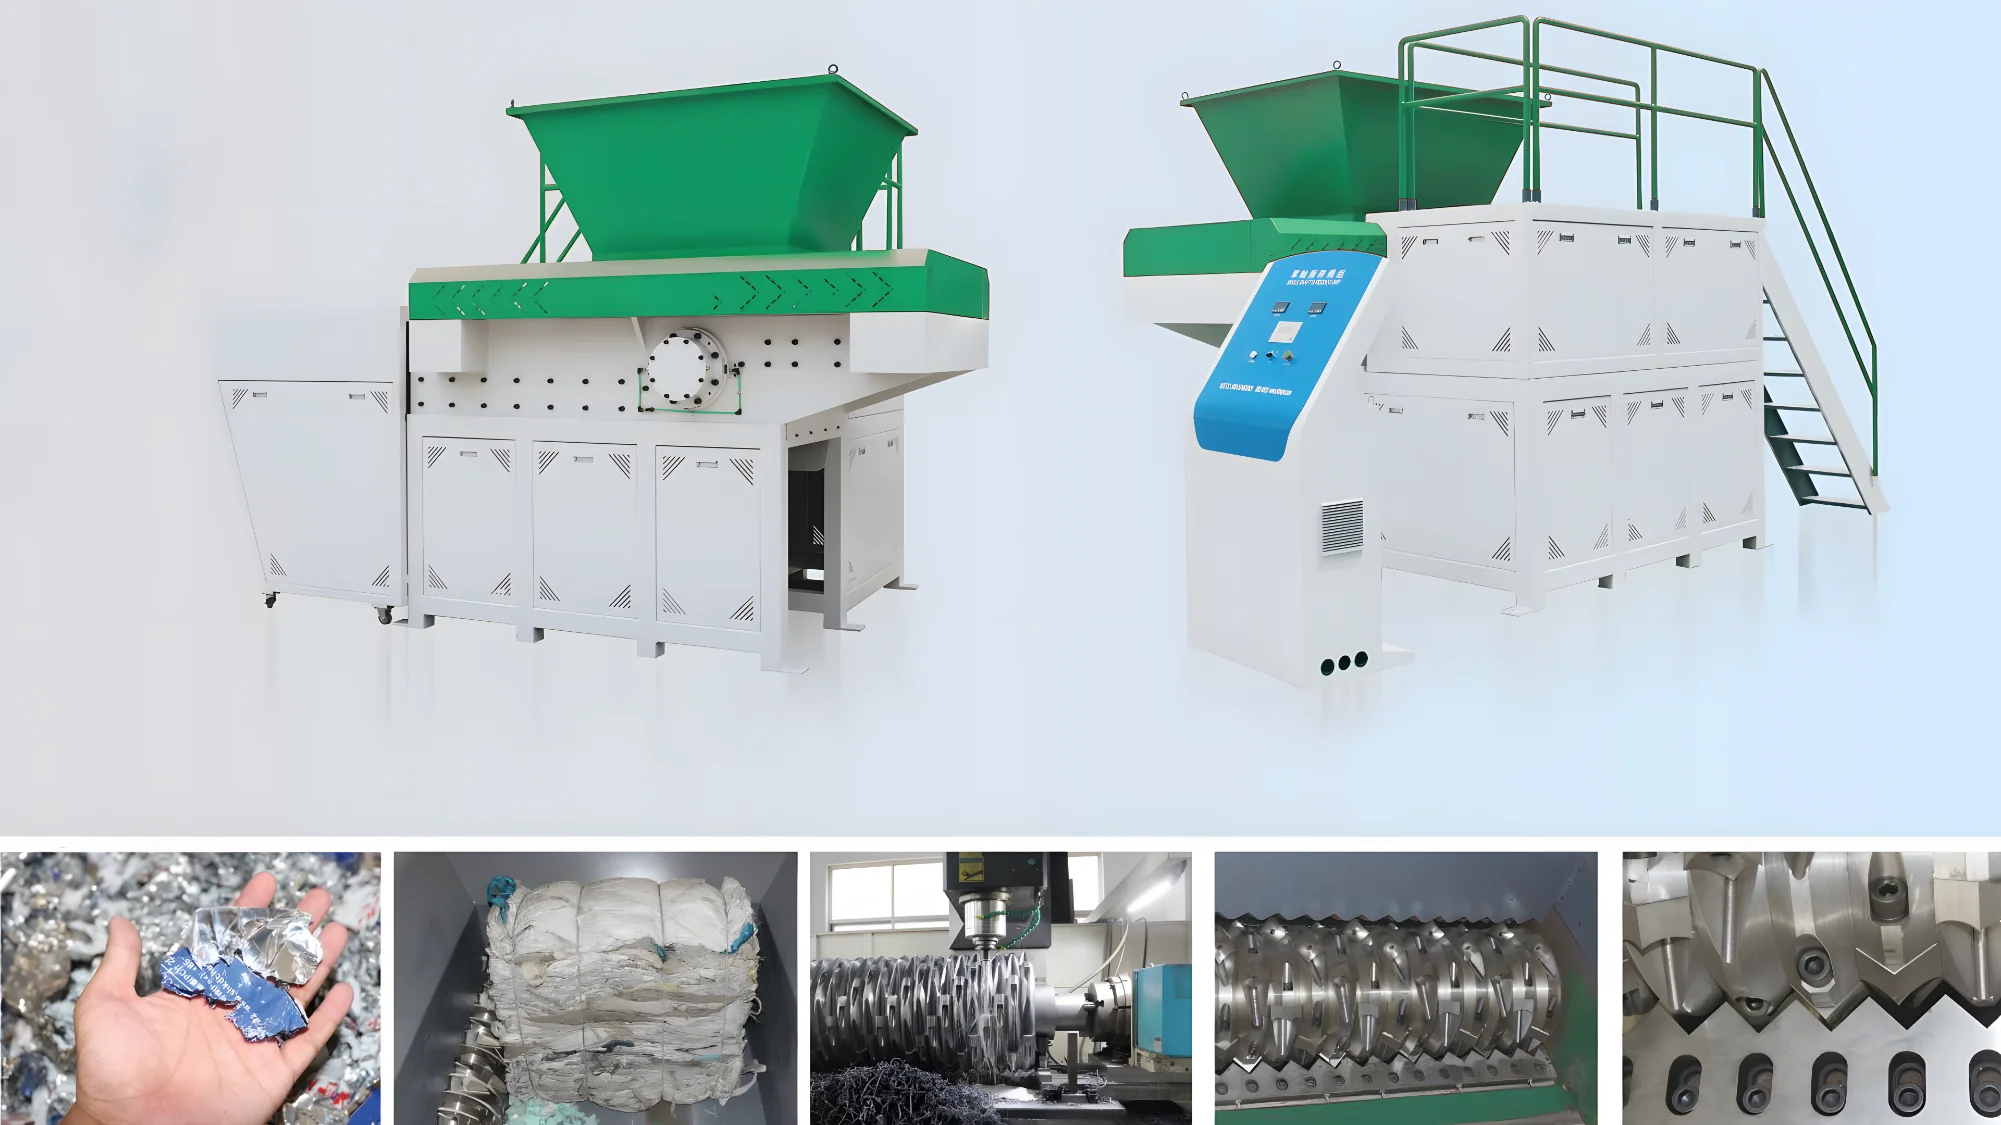 The image shows a single-shaft shredder and its components, which is used in the recycling industry to break down various materials, particularly plastics. The main shredder unit features a large hopper for material input, leading to the shredding mechanism where a single rotating shaft with mounted blades breaks down the material into smaller pieces. In the bottom-left, we see shredded material, indicating the typical output from such a machine. These small pieces can then be further processed or recycled. The bottom-right shows a close-up of the shredding shaft and blades, which highlights the rugged and durable construction necessary to handle tough materials. The images also suggest that the machinery is computer-controlled, as indicated by the electronic control panel shown in the top-right. The panel likely allows for adjustment of shredding speed and other operational parameters. The inclusion of a staircase and platform around the larger unit suggests it is quite large and requires access for maintenance or operation. These machines are critical in reducing the volume of waste materials and preparing them for subsequent steps in the recycling process, such as washing, extrusion, or pelletizing.